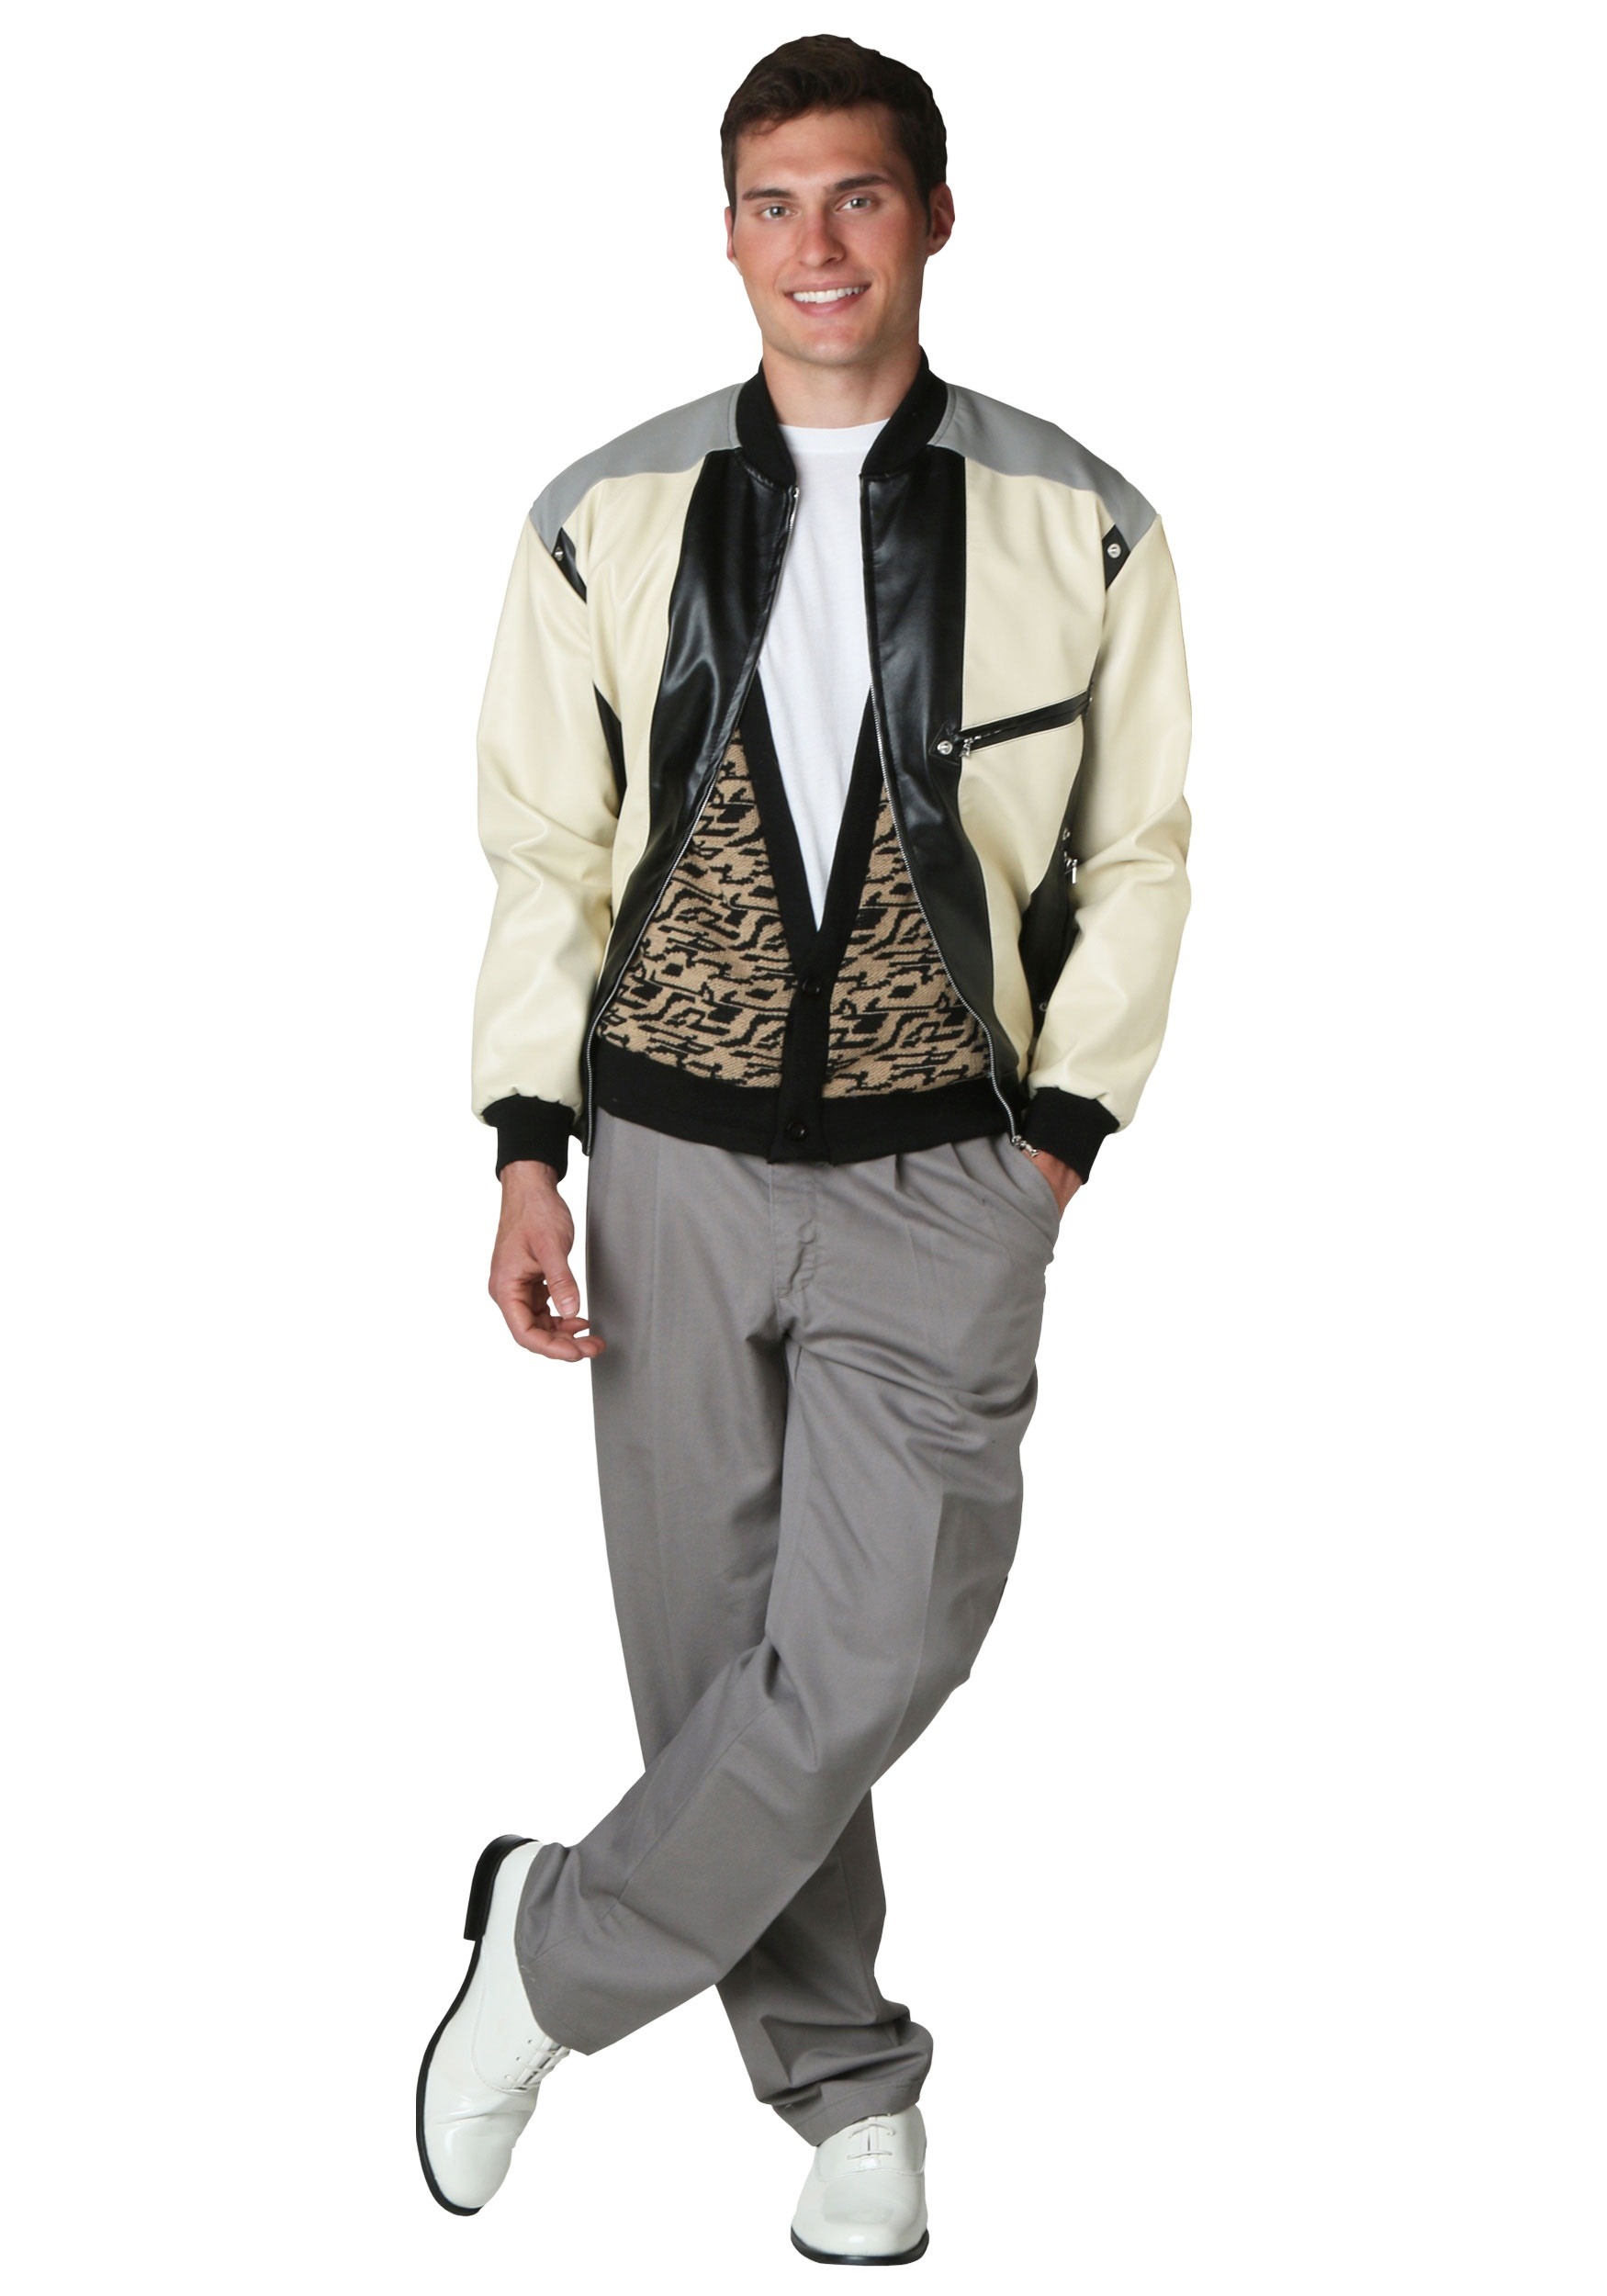 Plus Size Ferris Bueller Costume from Ferris Bueller's Day Off | 80s Movie Costumes